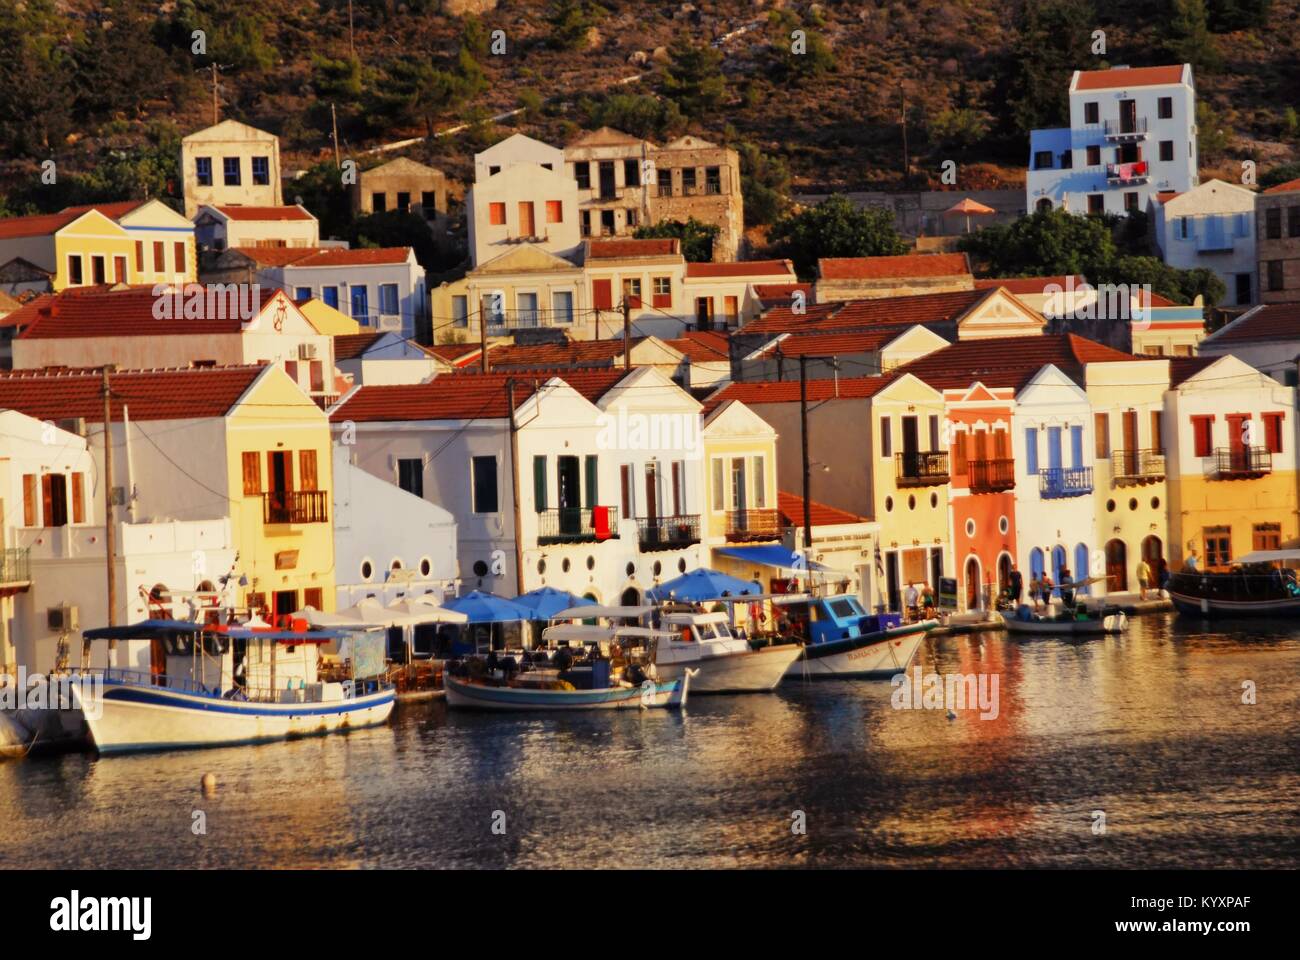 View of the harbour of the town of Kastelorizo, Kastelorizo island, Dodecanese islands, Greece. Stock Photo